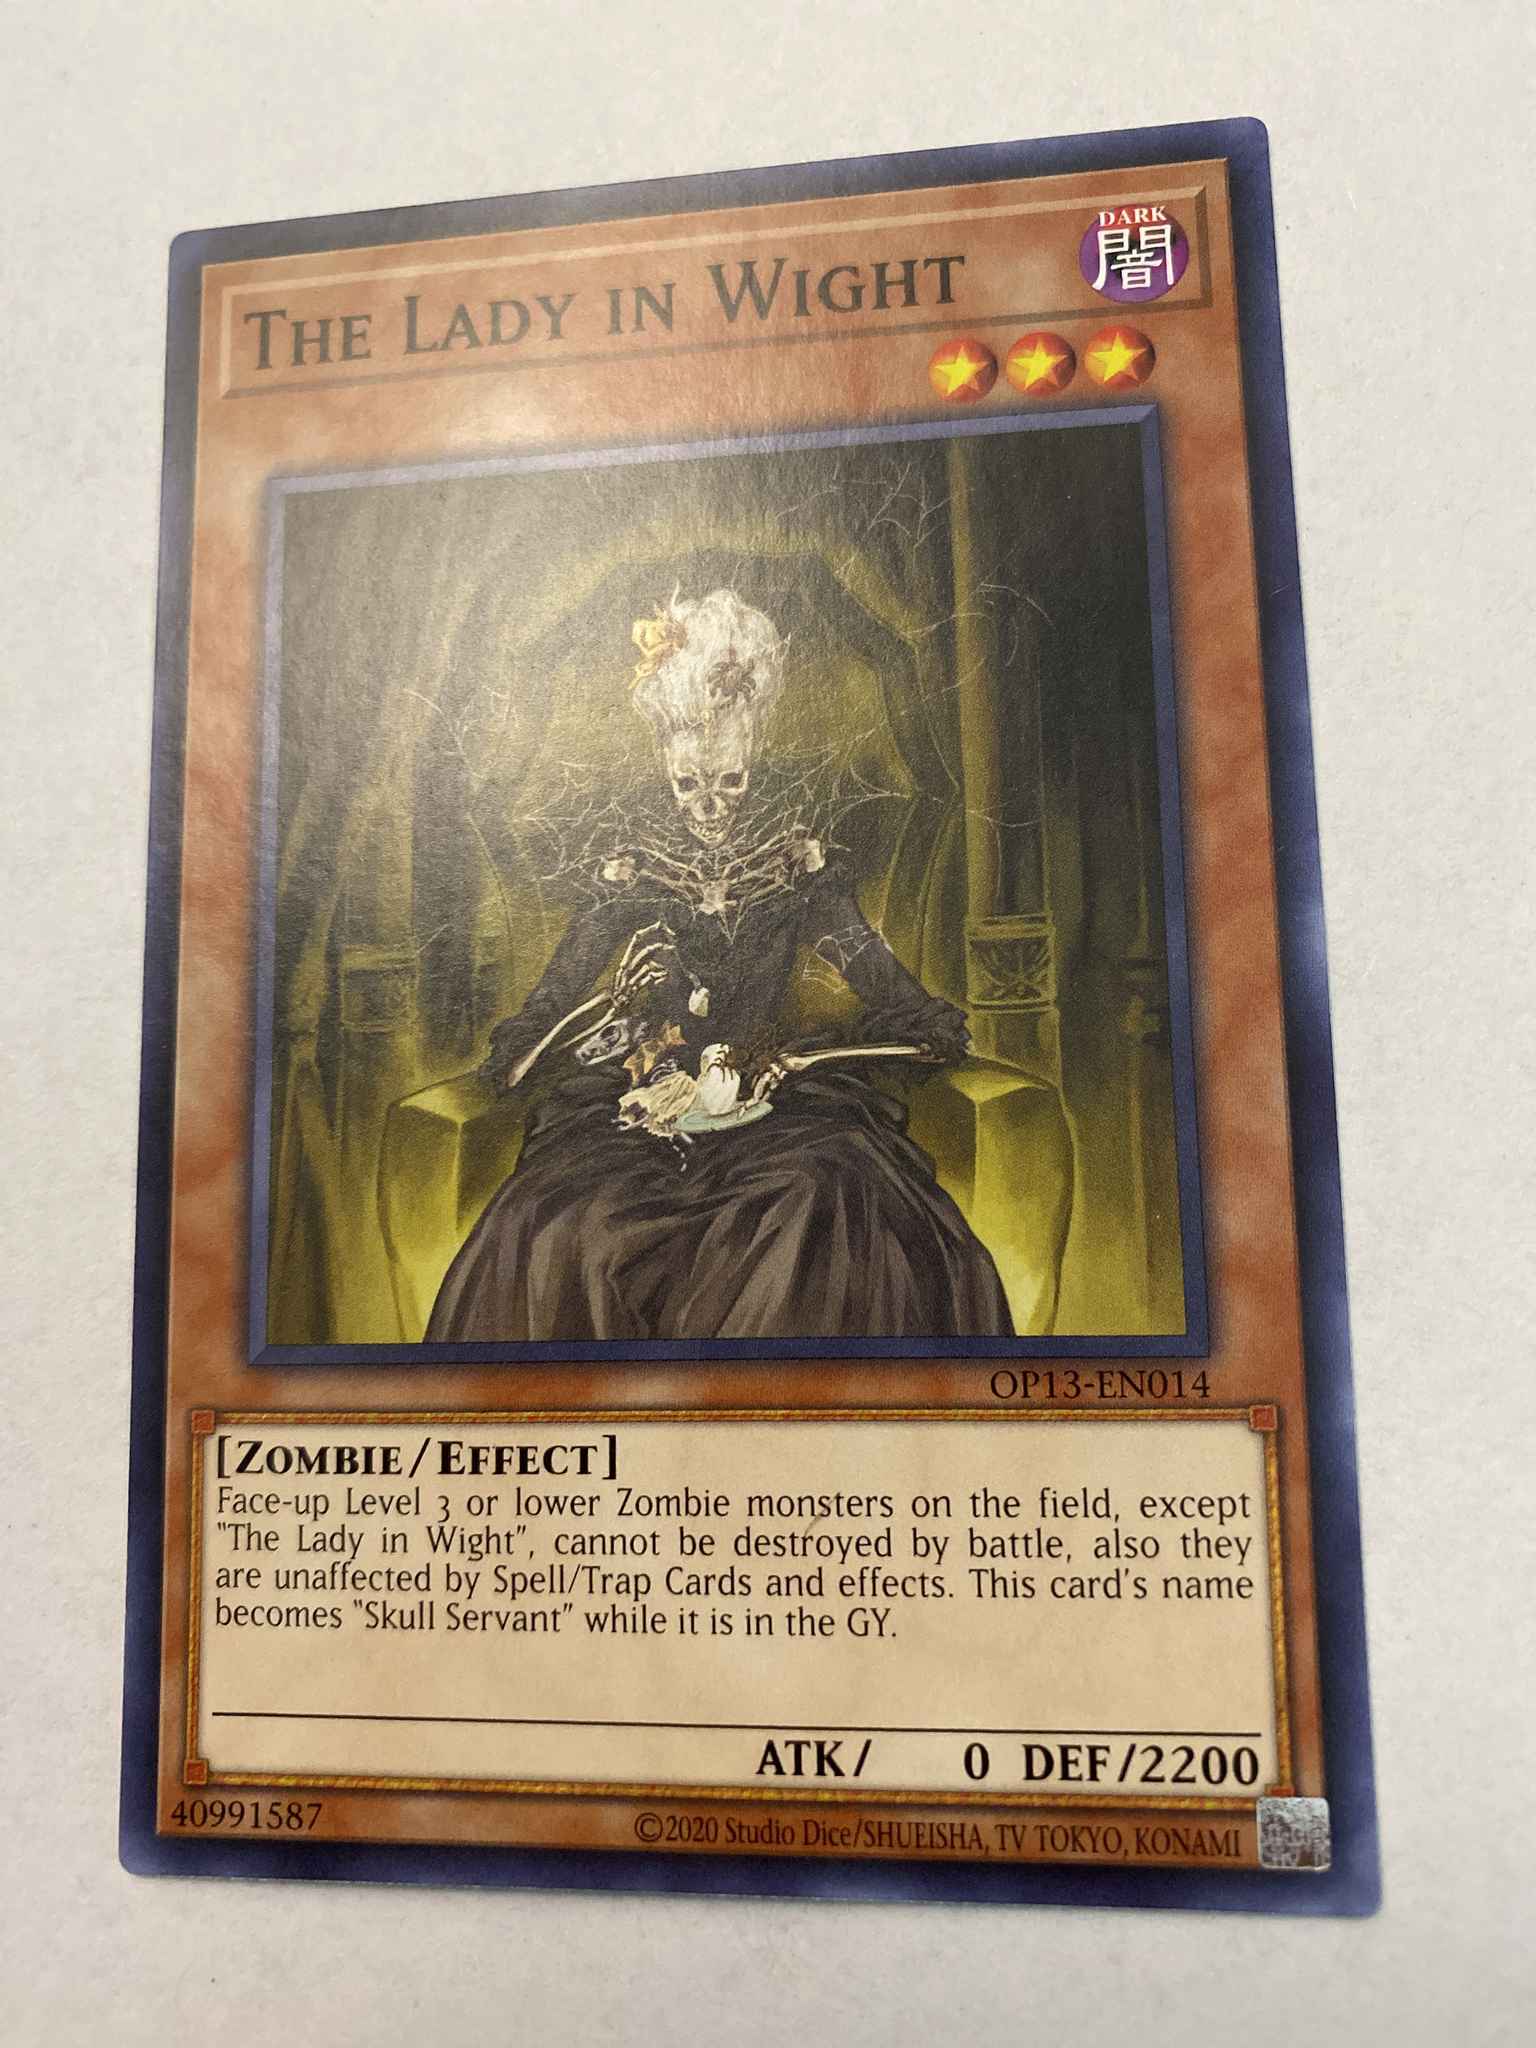 3x UNLIMITED EDITION THE LADY IN WIGHT  OP13-EN014 COMMON YUGIOH OTS13 UNPLAYED